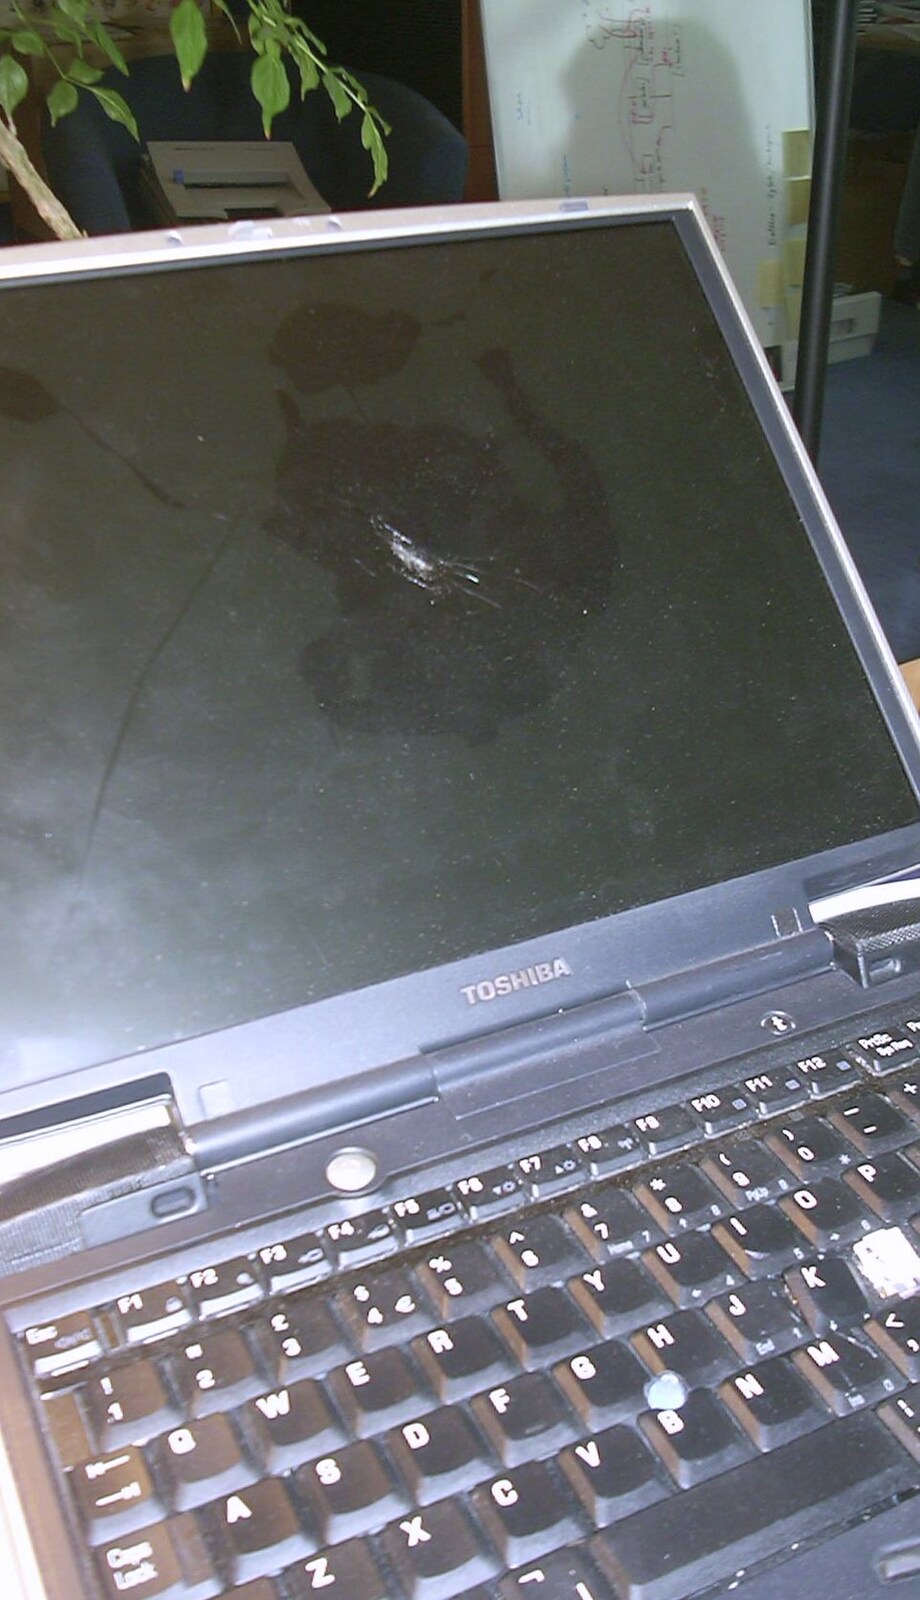 Someone's trashed their laptop from A BSCC Barbeque and Bill's 3G Lab Party, Papworth Everard, Cambridgeshire - 1st June 2001